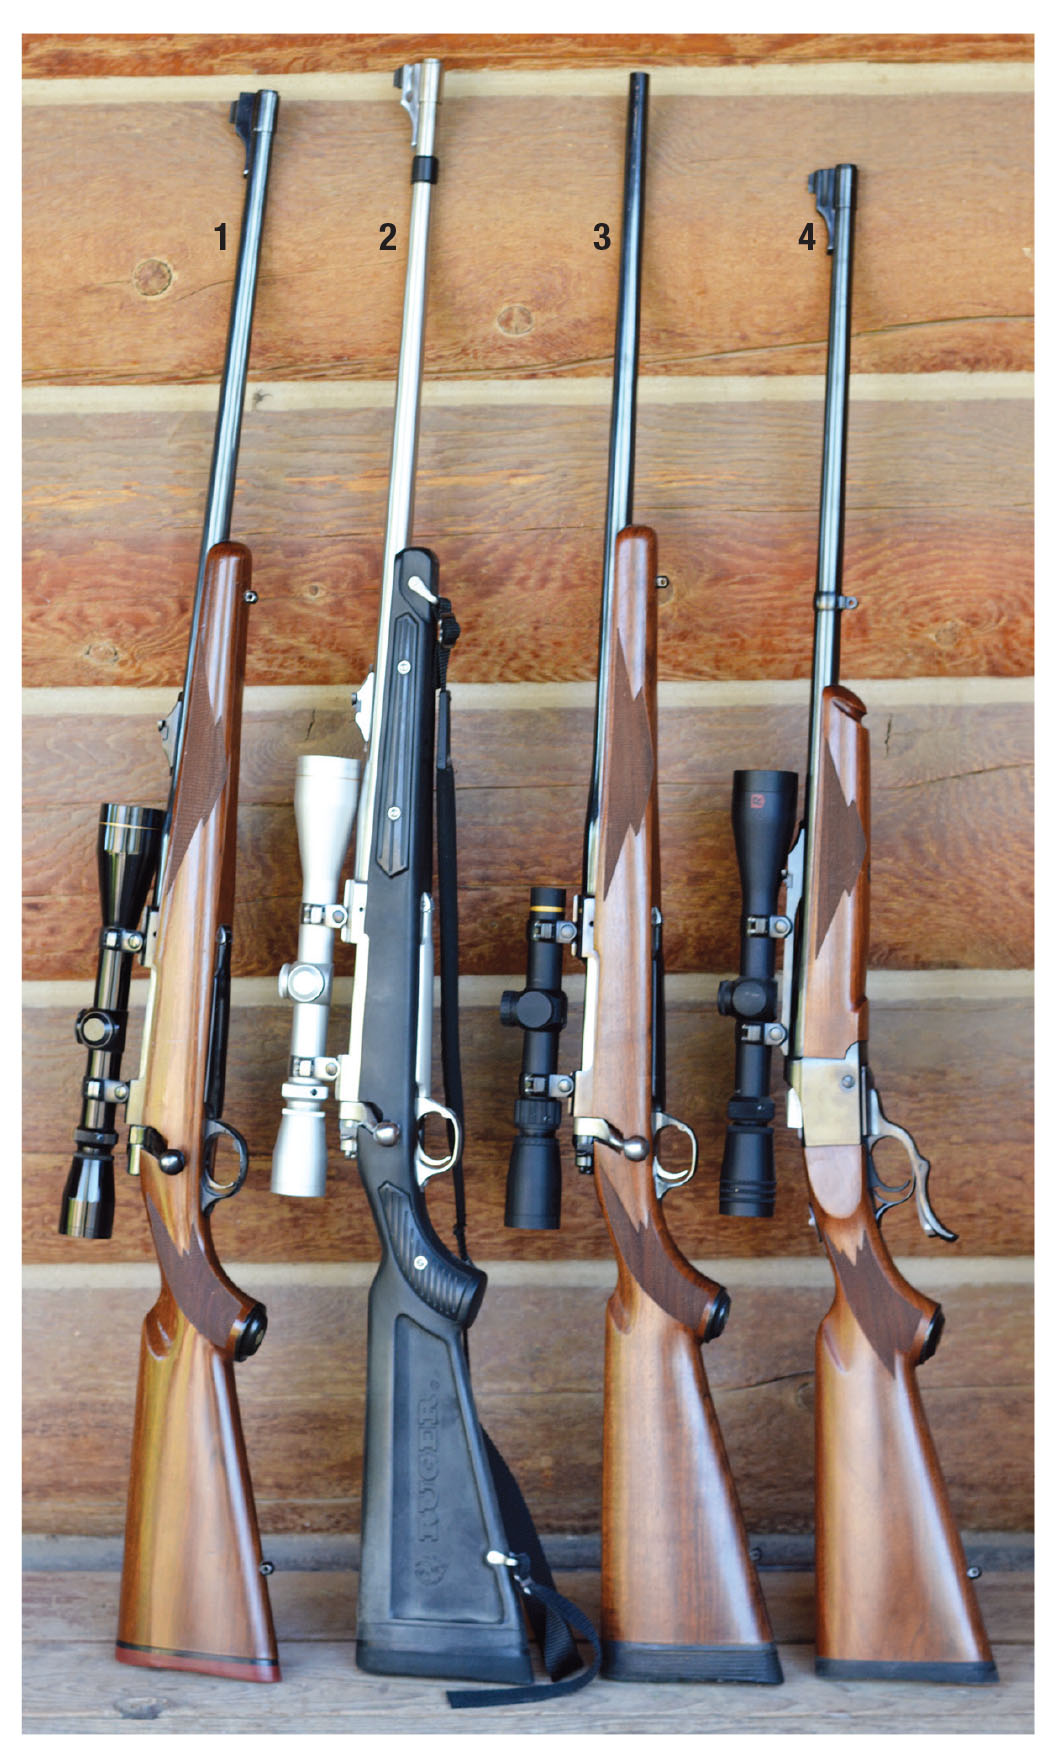 Brian has used many Ruger rifles chambered in .338 Winchester Magnum, including the (1) M77RS, (2) M77RS MK II All-Weather, (3) M77 MK II and (4) Ruger No. 1.